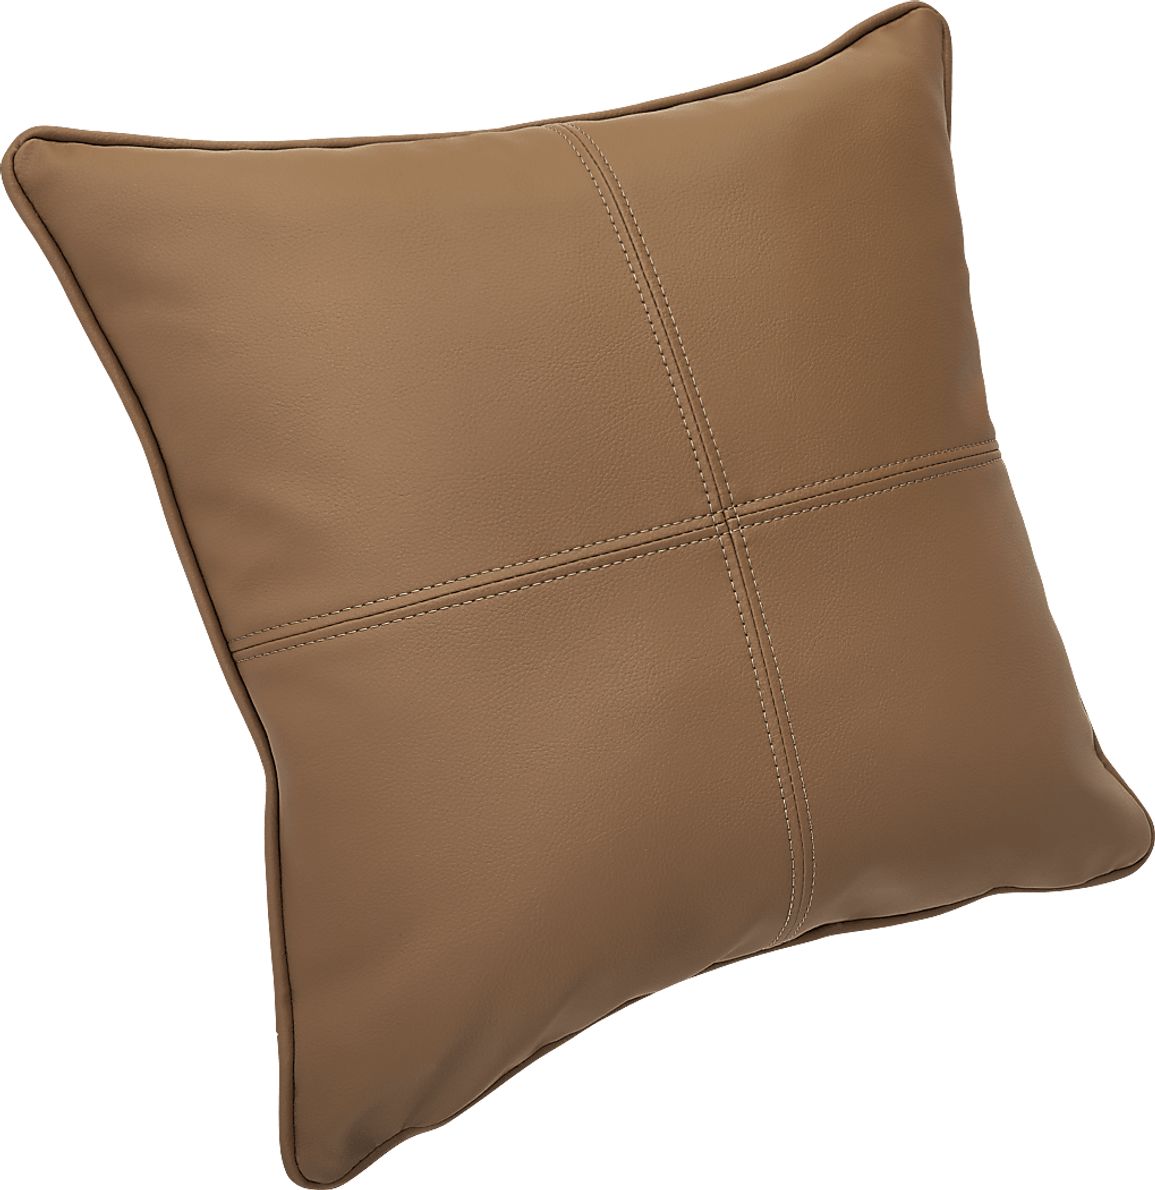 Barnwell Caramel Indoor/Outdoor Accent Pillows, Set of Two